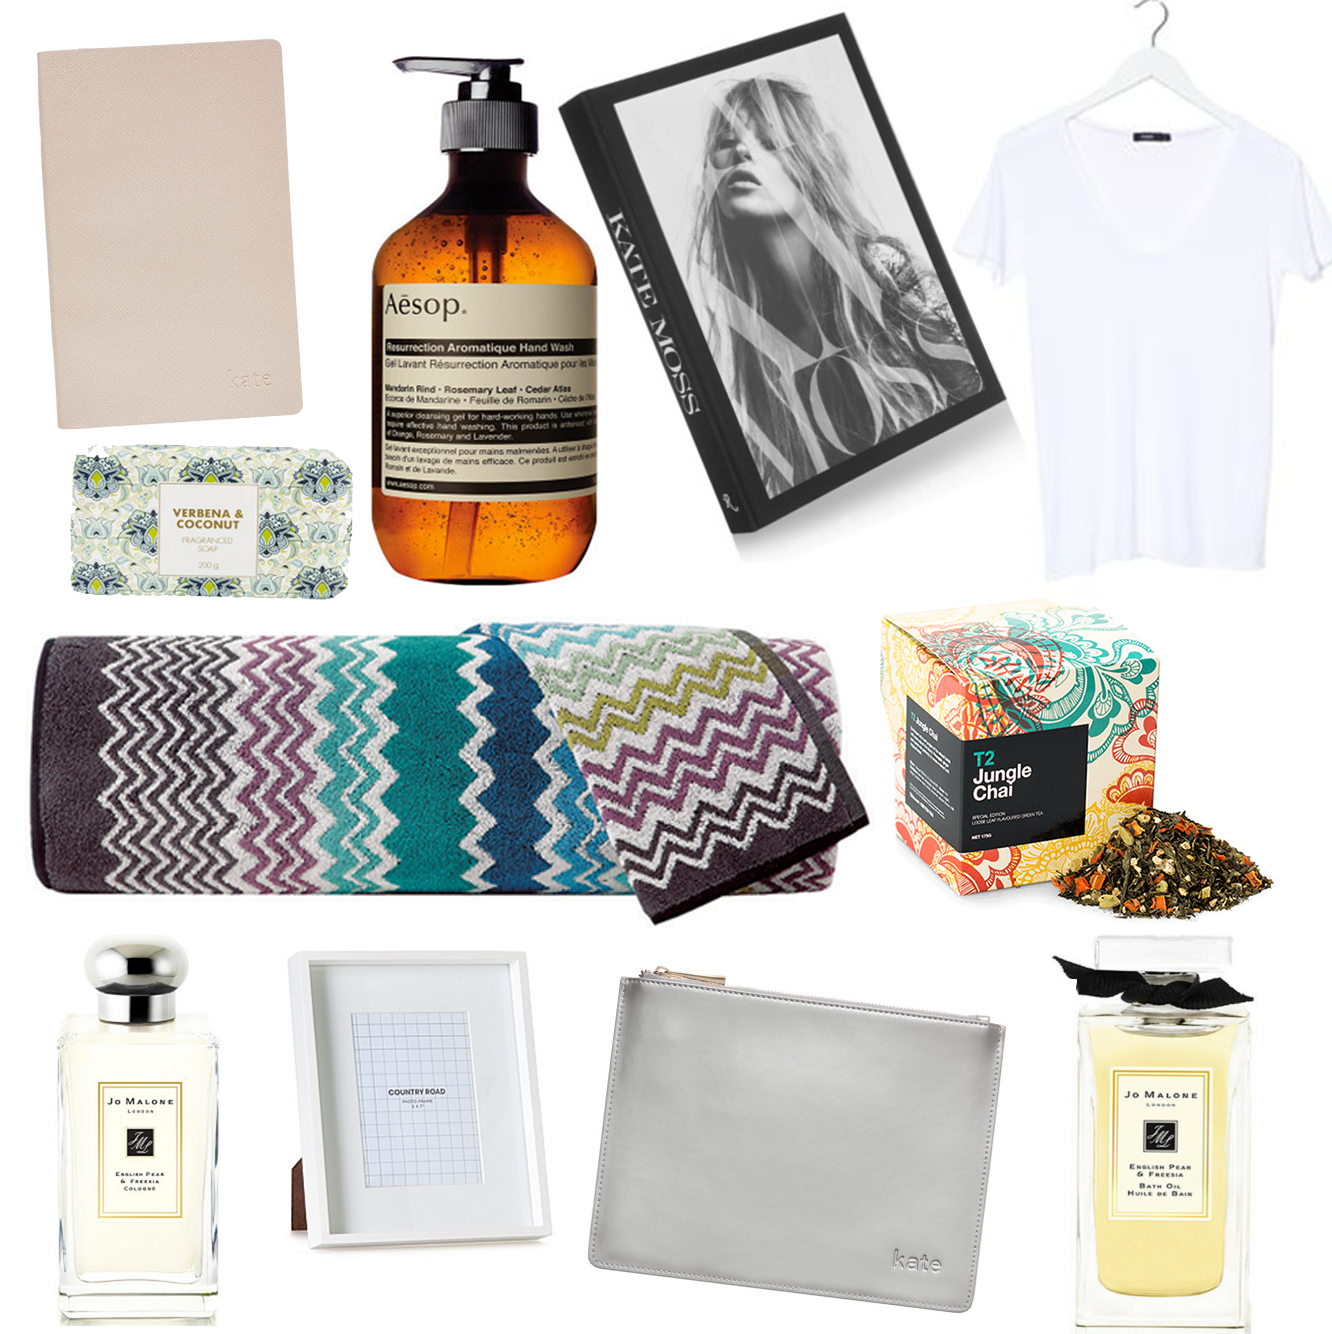 Gift suggestions for the hard to buy for people in your life - Kate ...